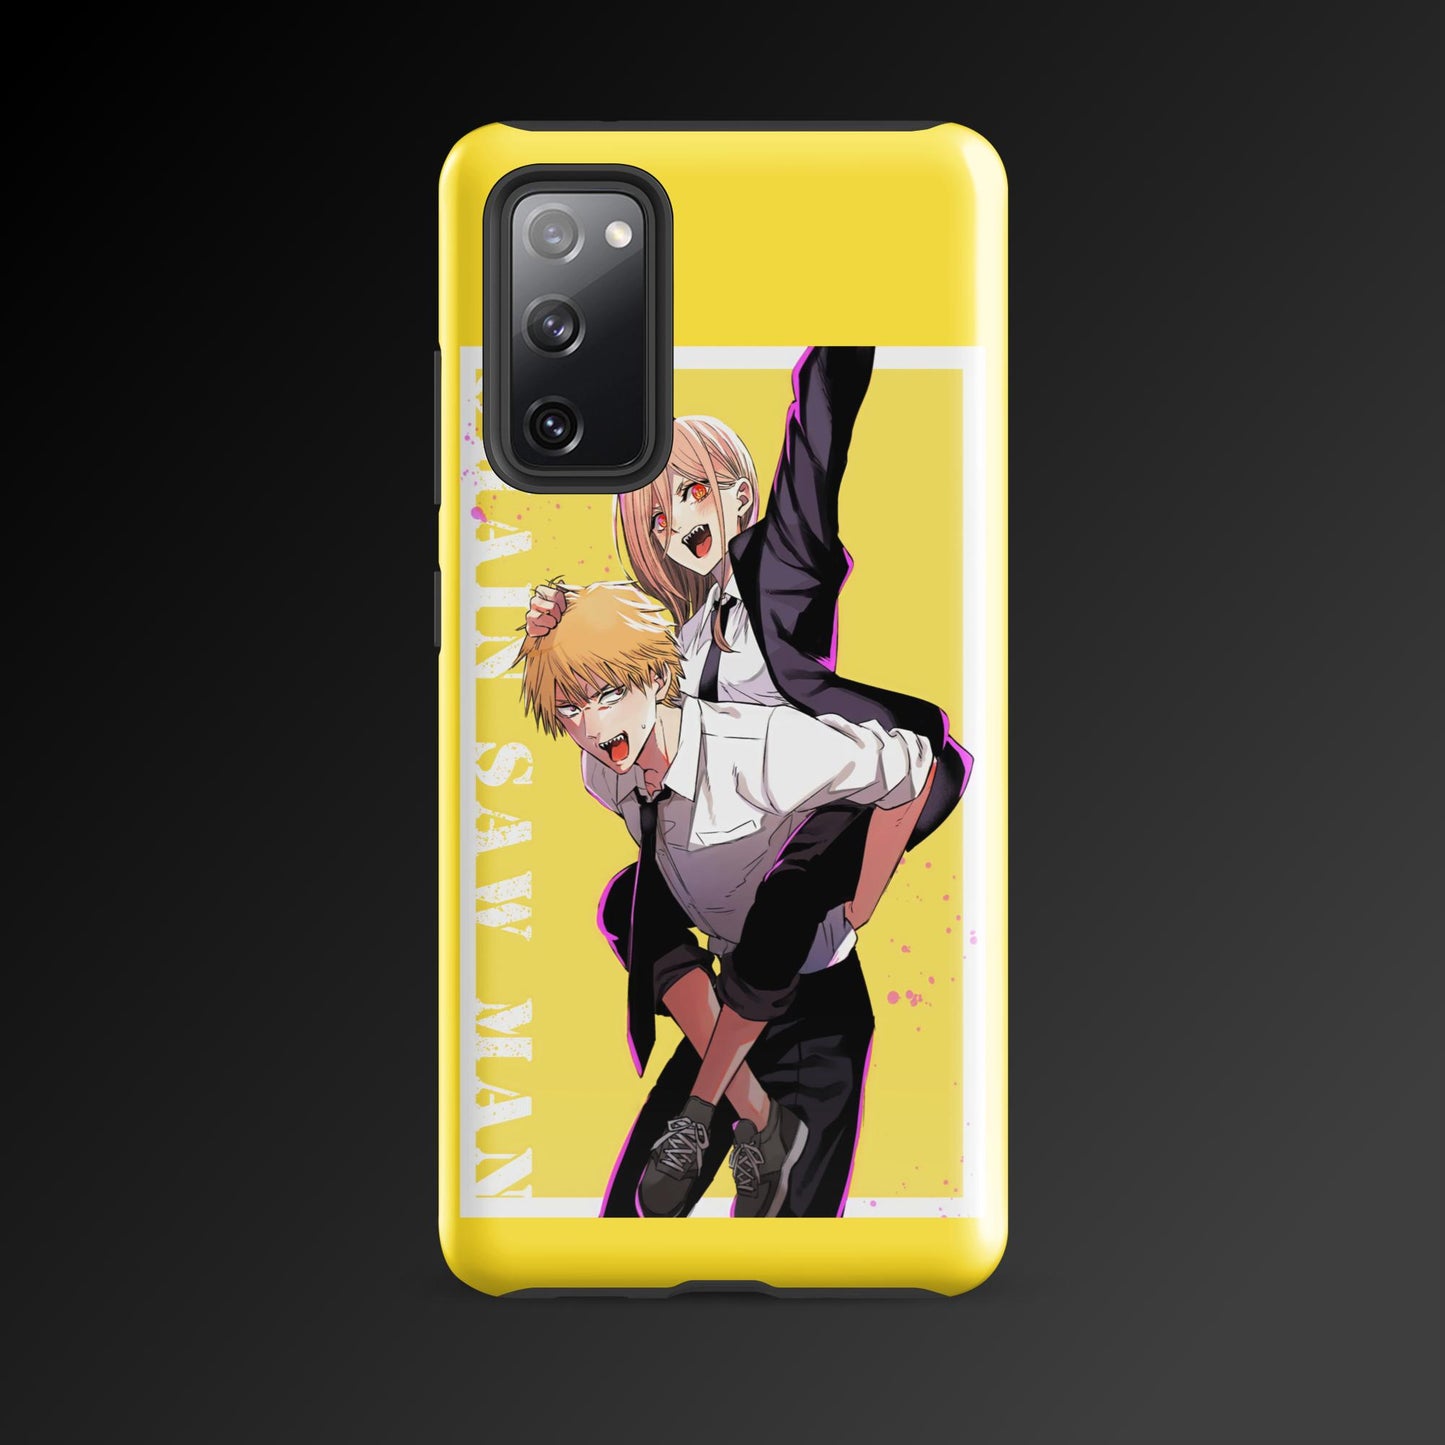 Chain Saw Man Tough Case, Shockproof Phone Case,Cool Designed Phone Cases, Pocket-friendly